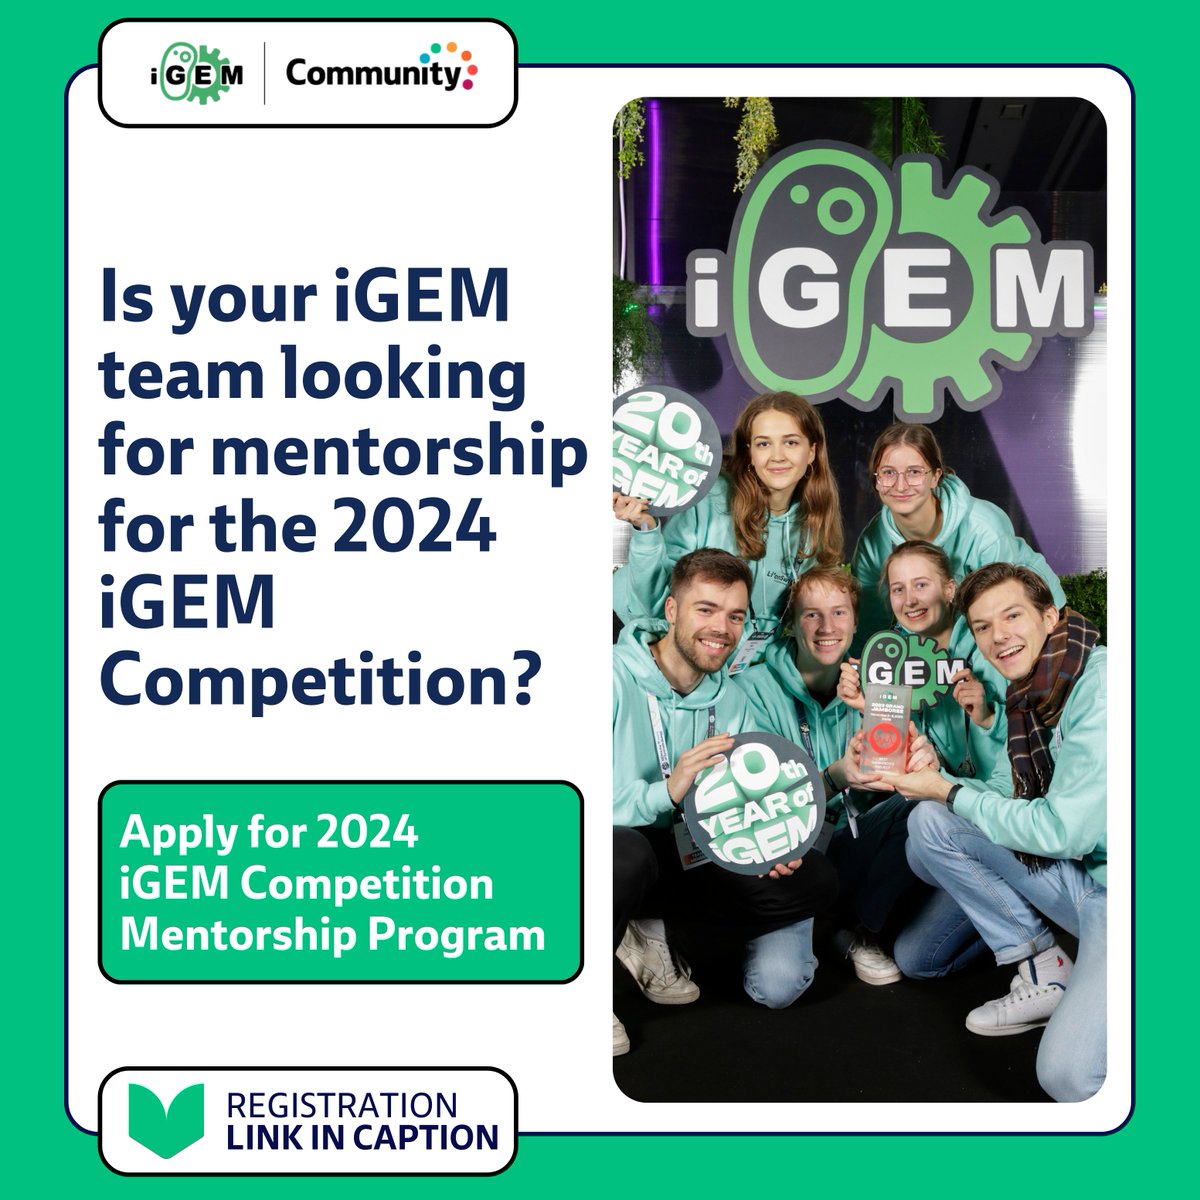 Hellooo #iGEM2024 teams! Are you looking for mentors to help guide you through competition deliverables, important deadlines, and also share tips from their iGEM experience? Apply today for the 2024 iGEM Mentorship Program community.igem.org/projects/mento…